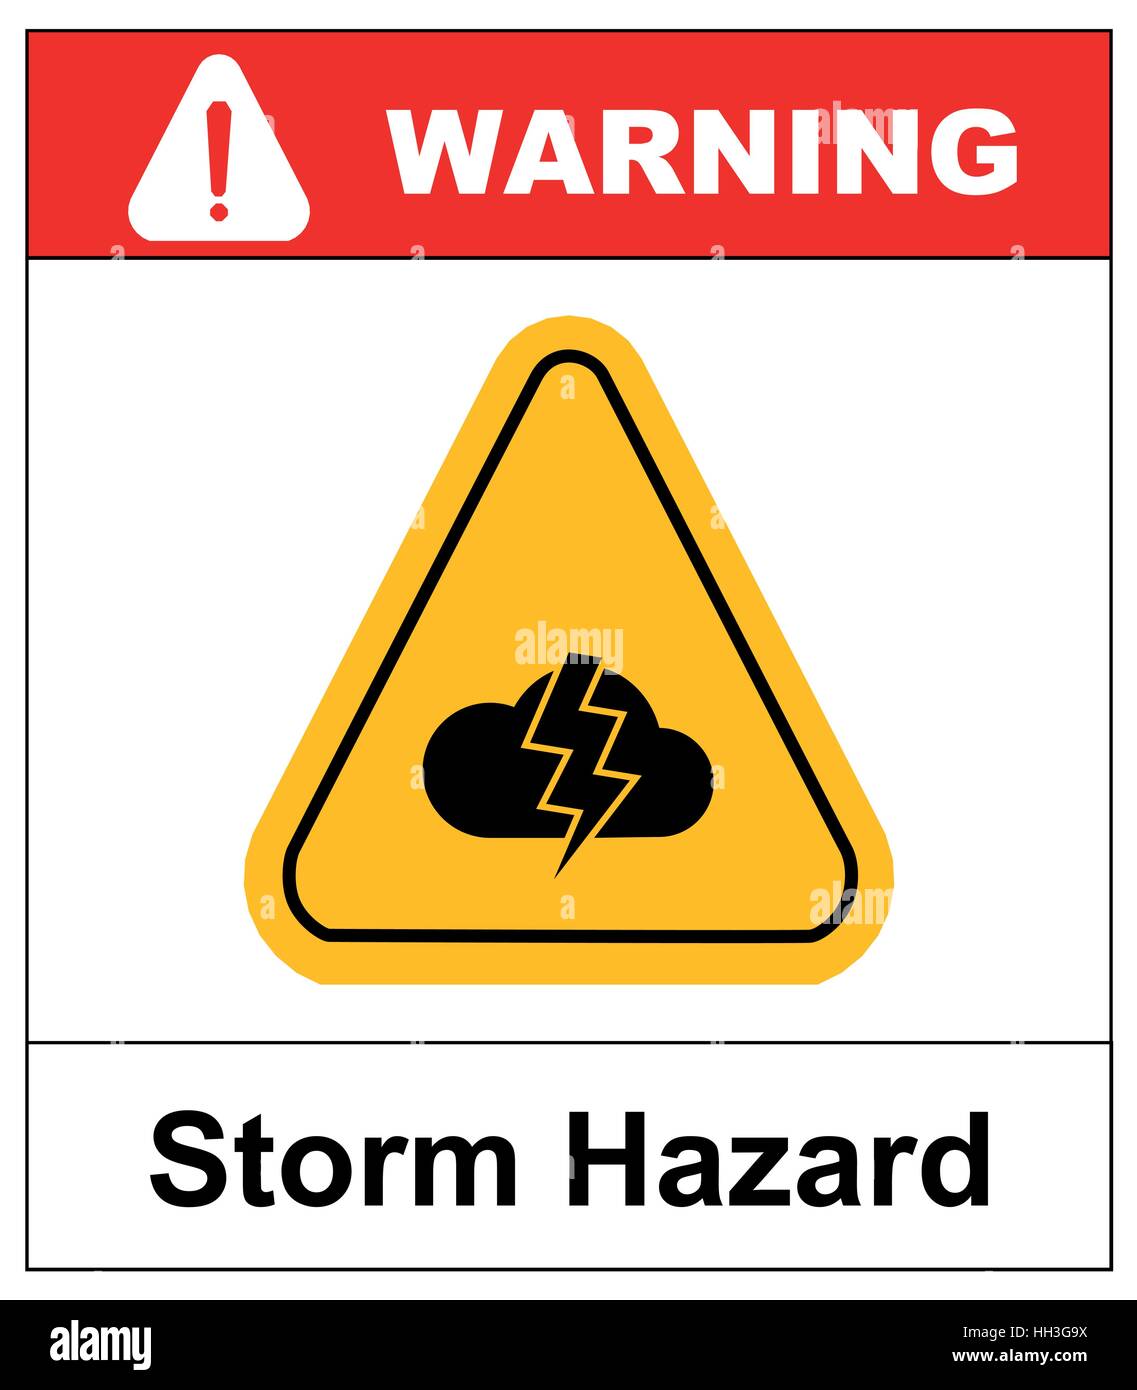 Storm Hazard sign. Vector warning sticker label for outdoors, yellow triangle isolated on white with text. Stock Vector